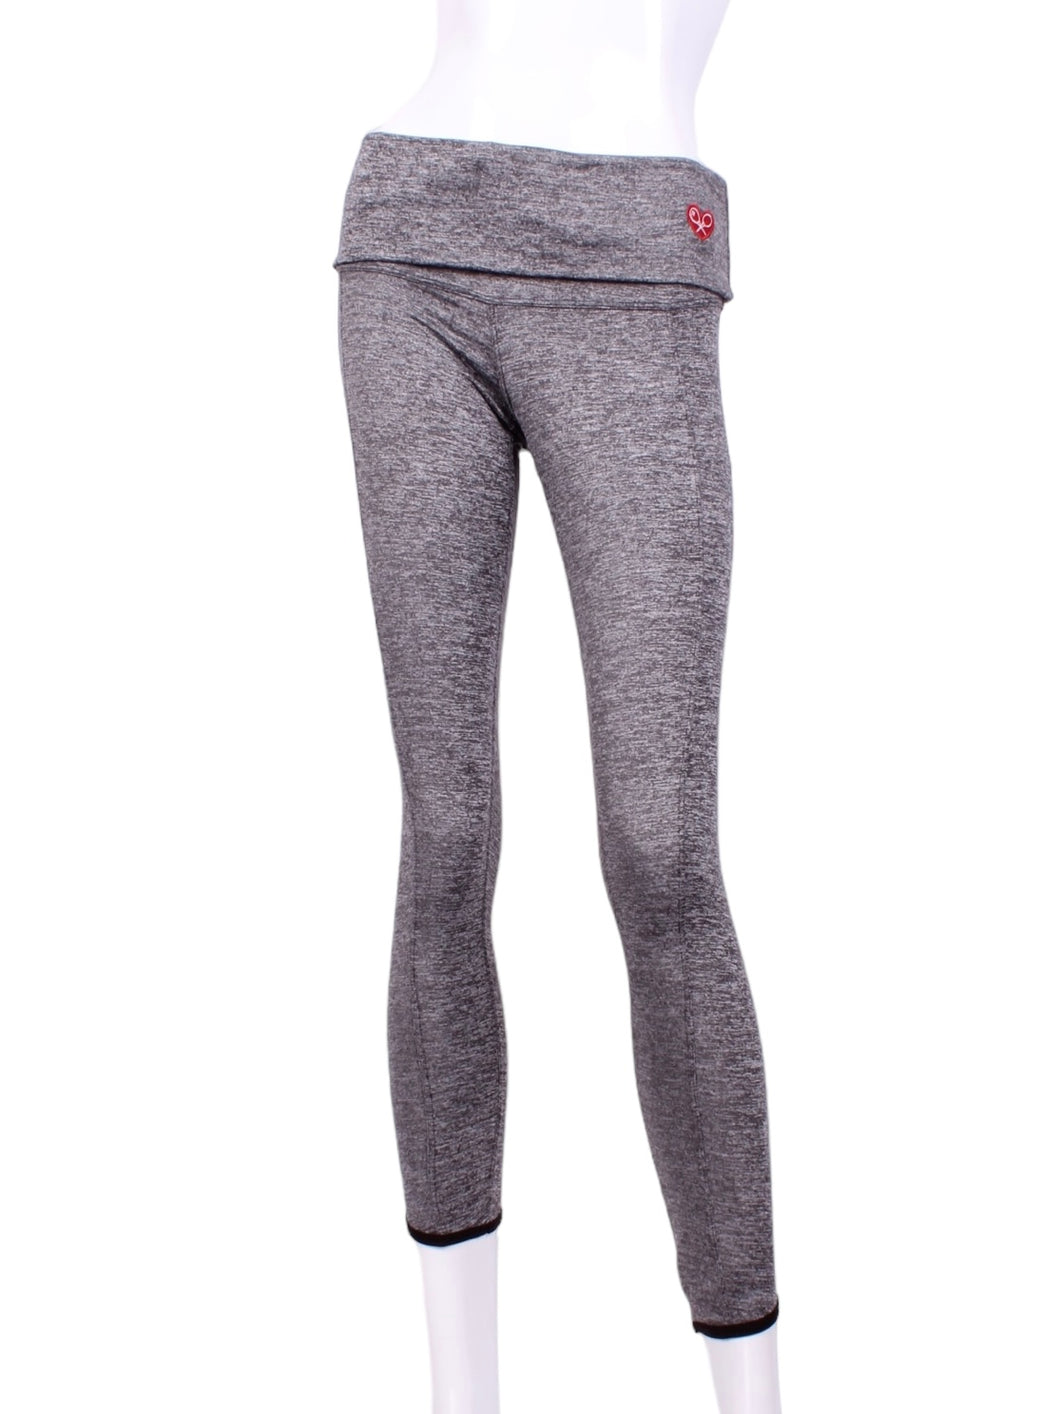 This is our limited edition rolled/high waist leggings in Grey.  This piece has soft and quick-drying.  We make these in very small quantities - by design.  Unique.  Luxurious.  Comfortable.  Cool.  Fun.